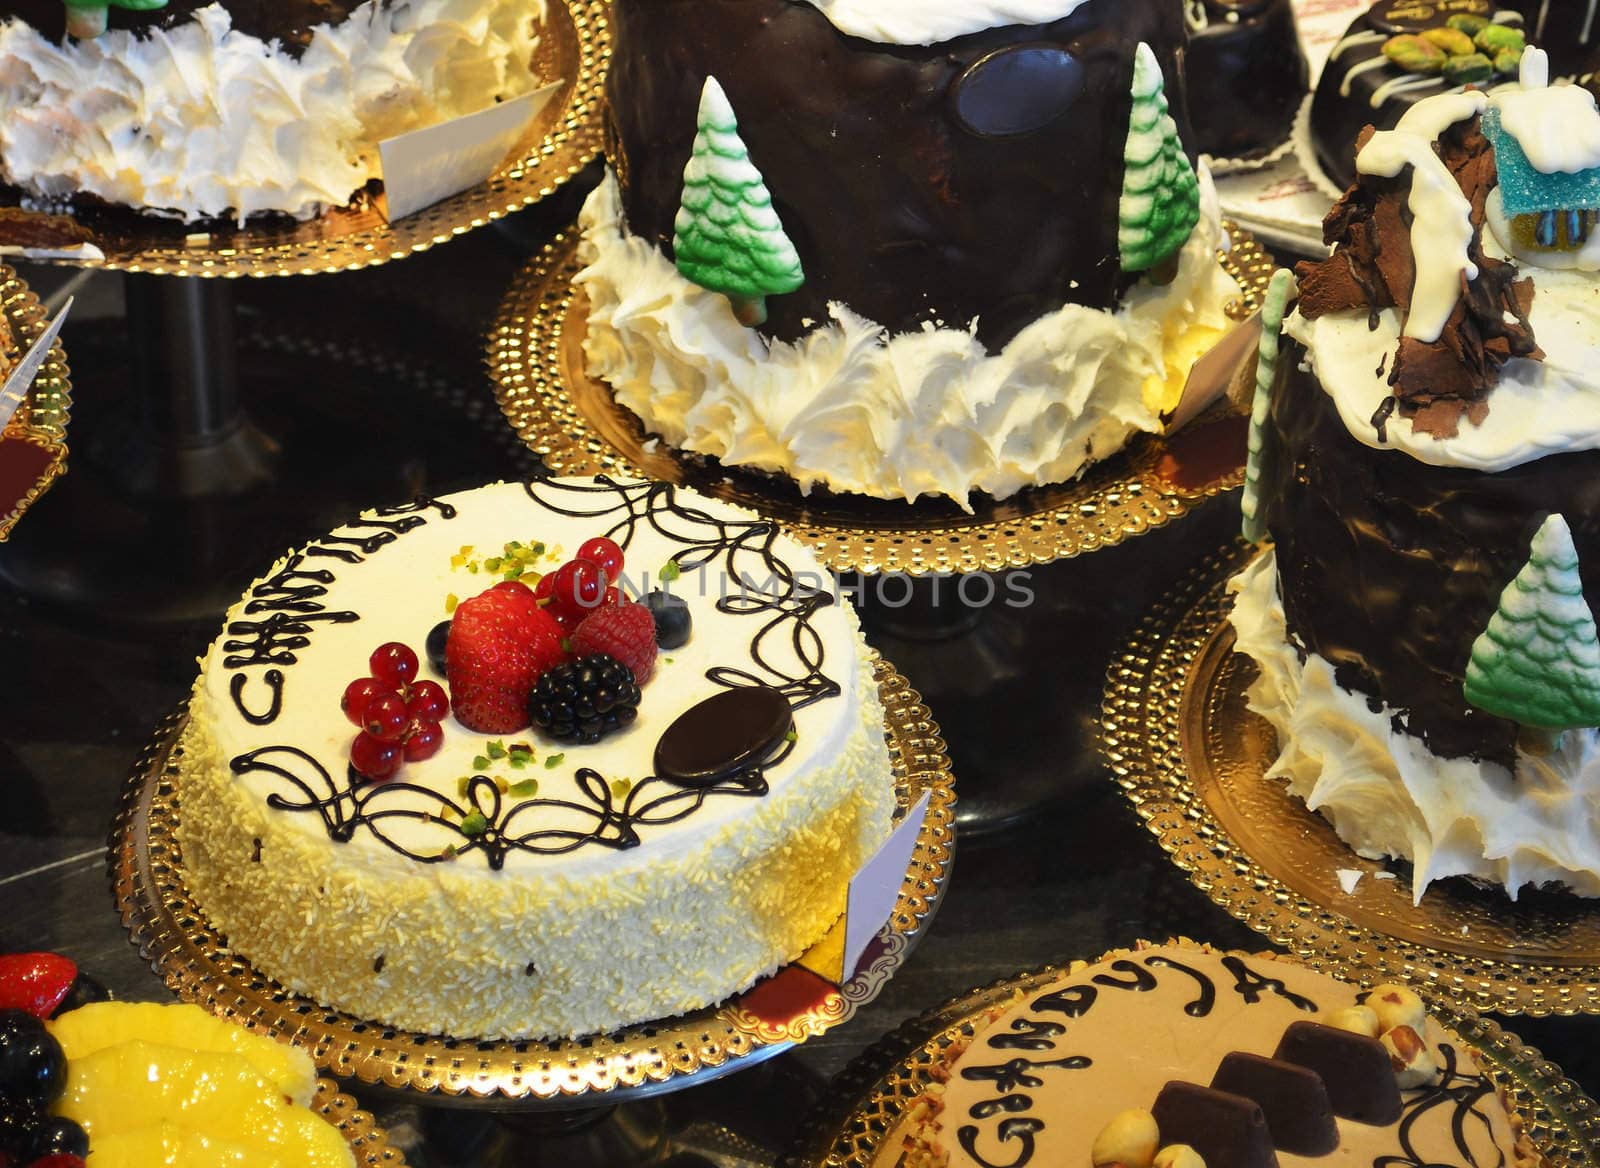 Colorful fancy gourmet cakes with cream, chocolate, fruit